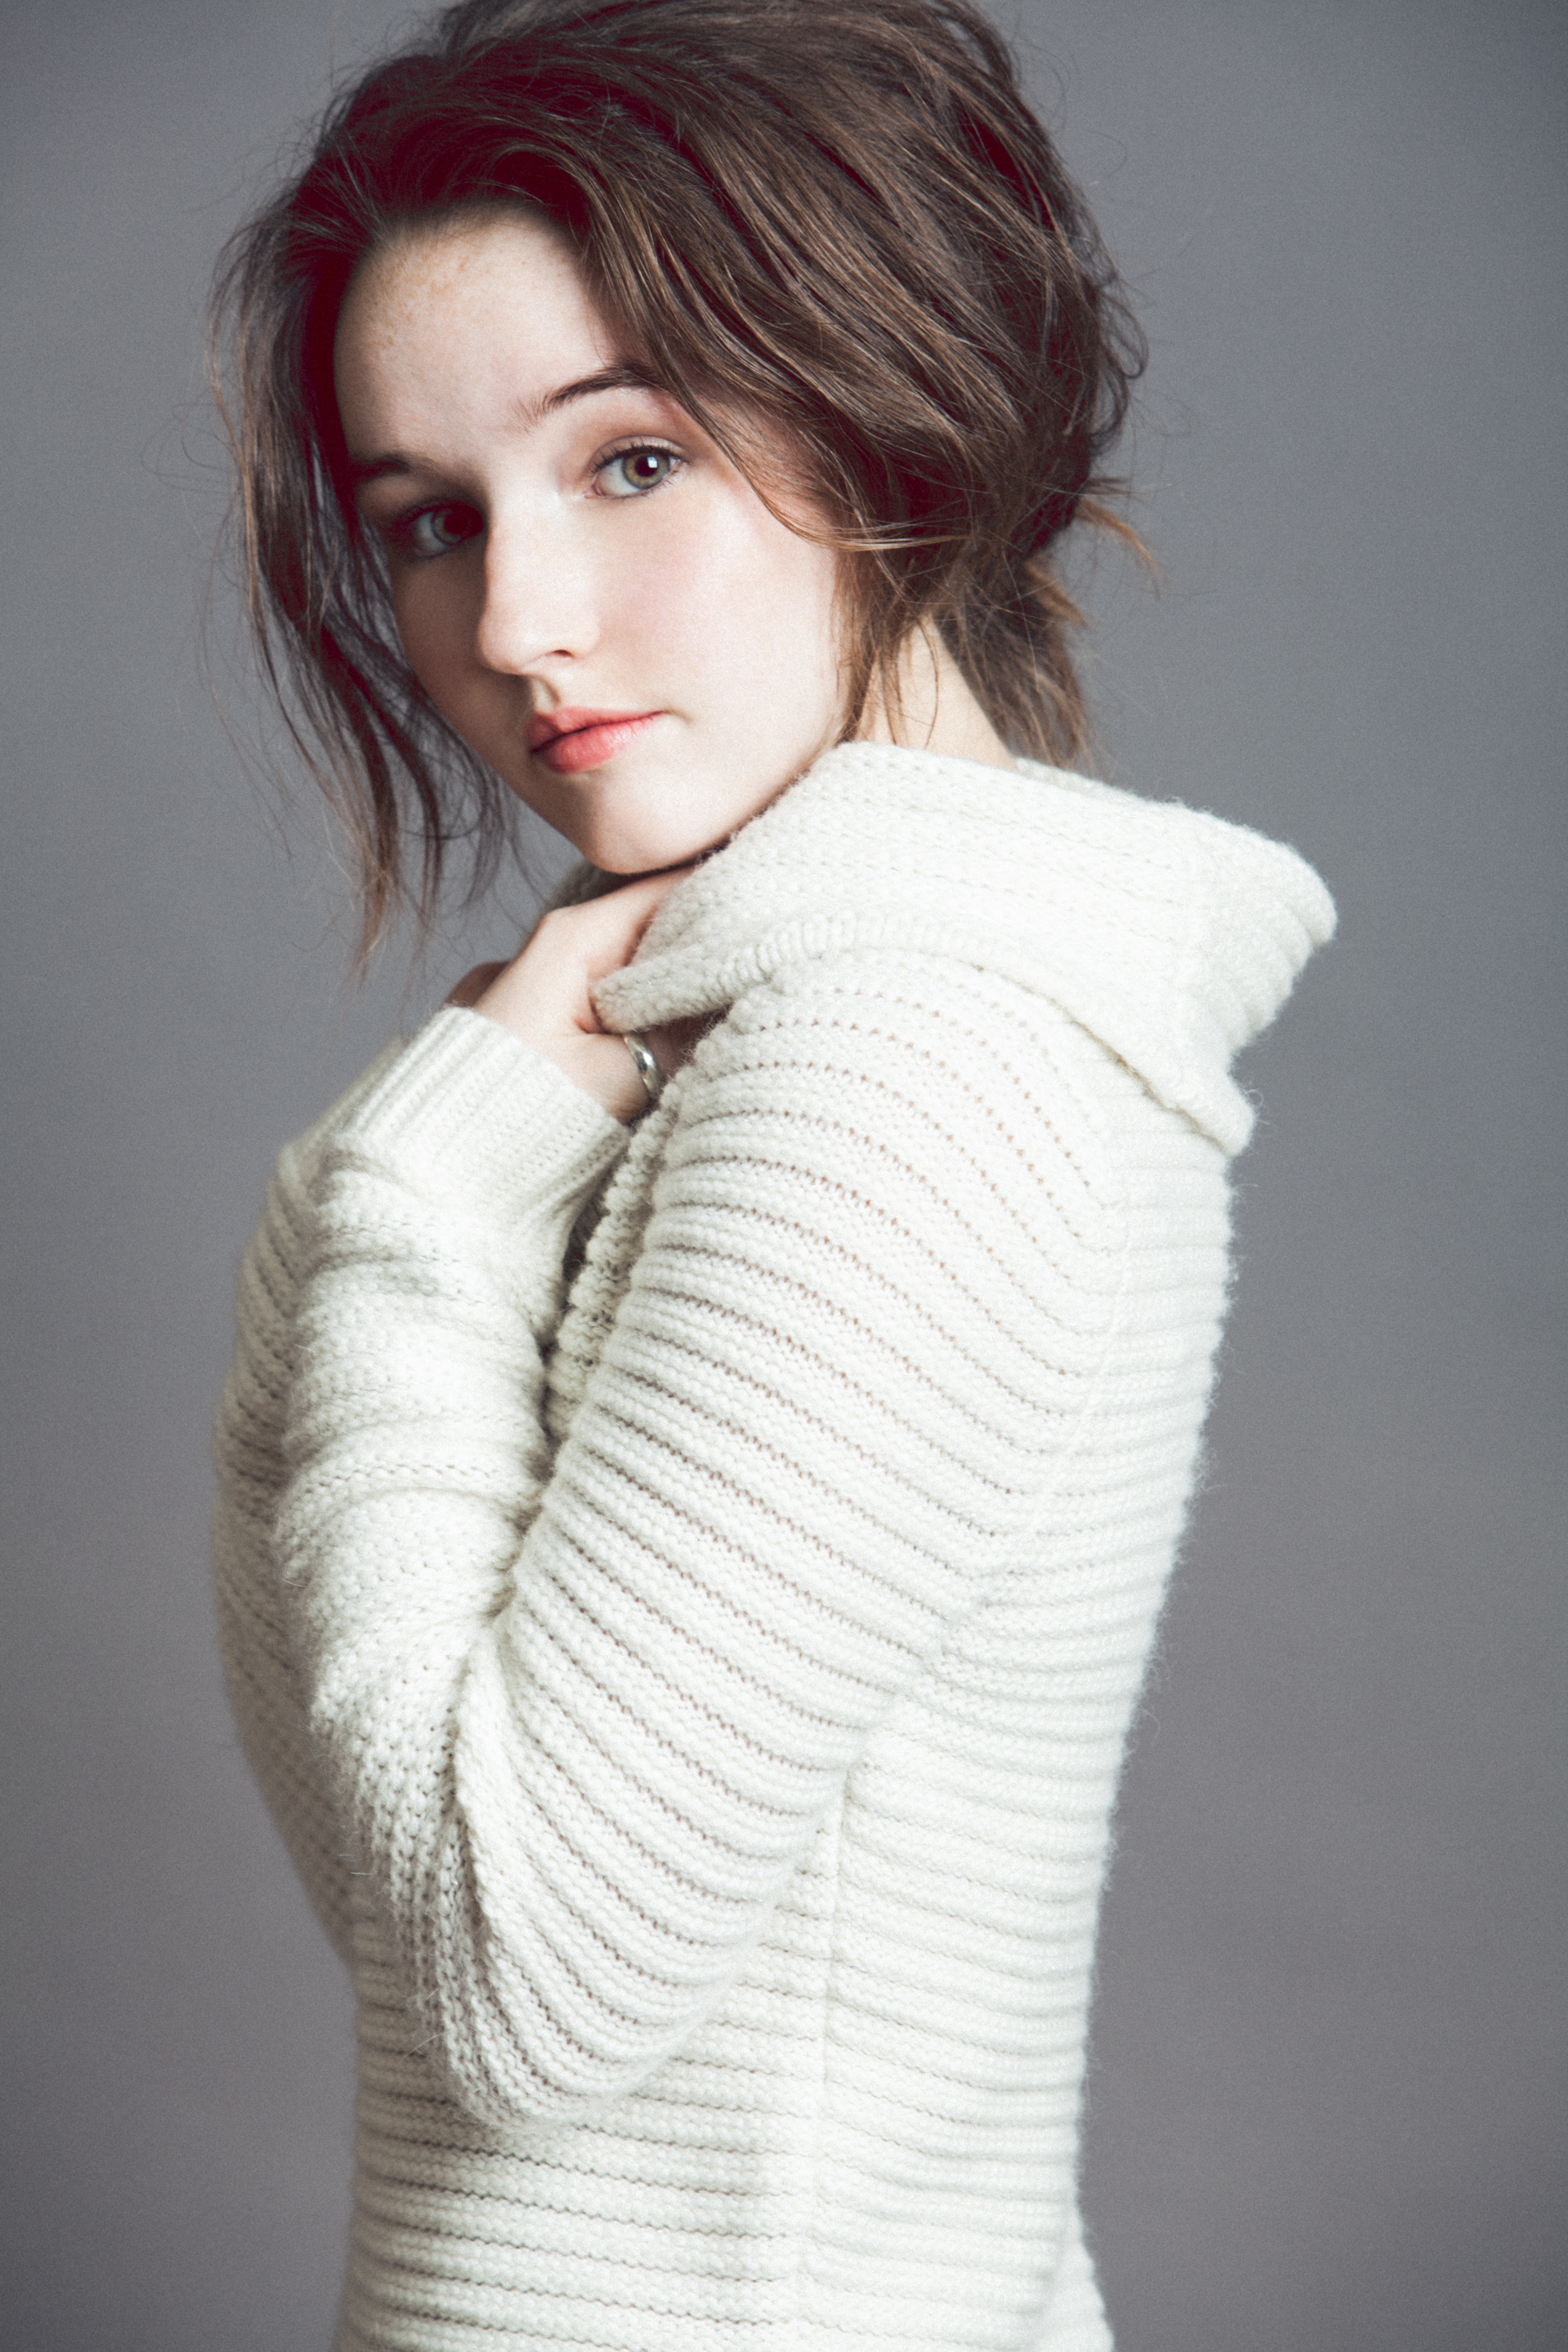 New Kaitlyn Dever Actress Wallpapers